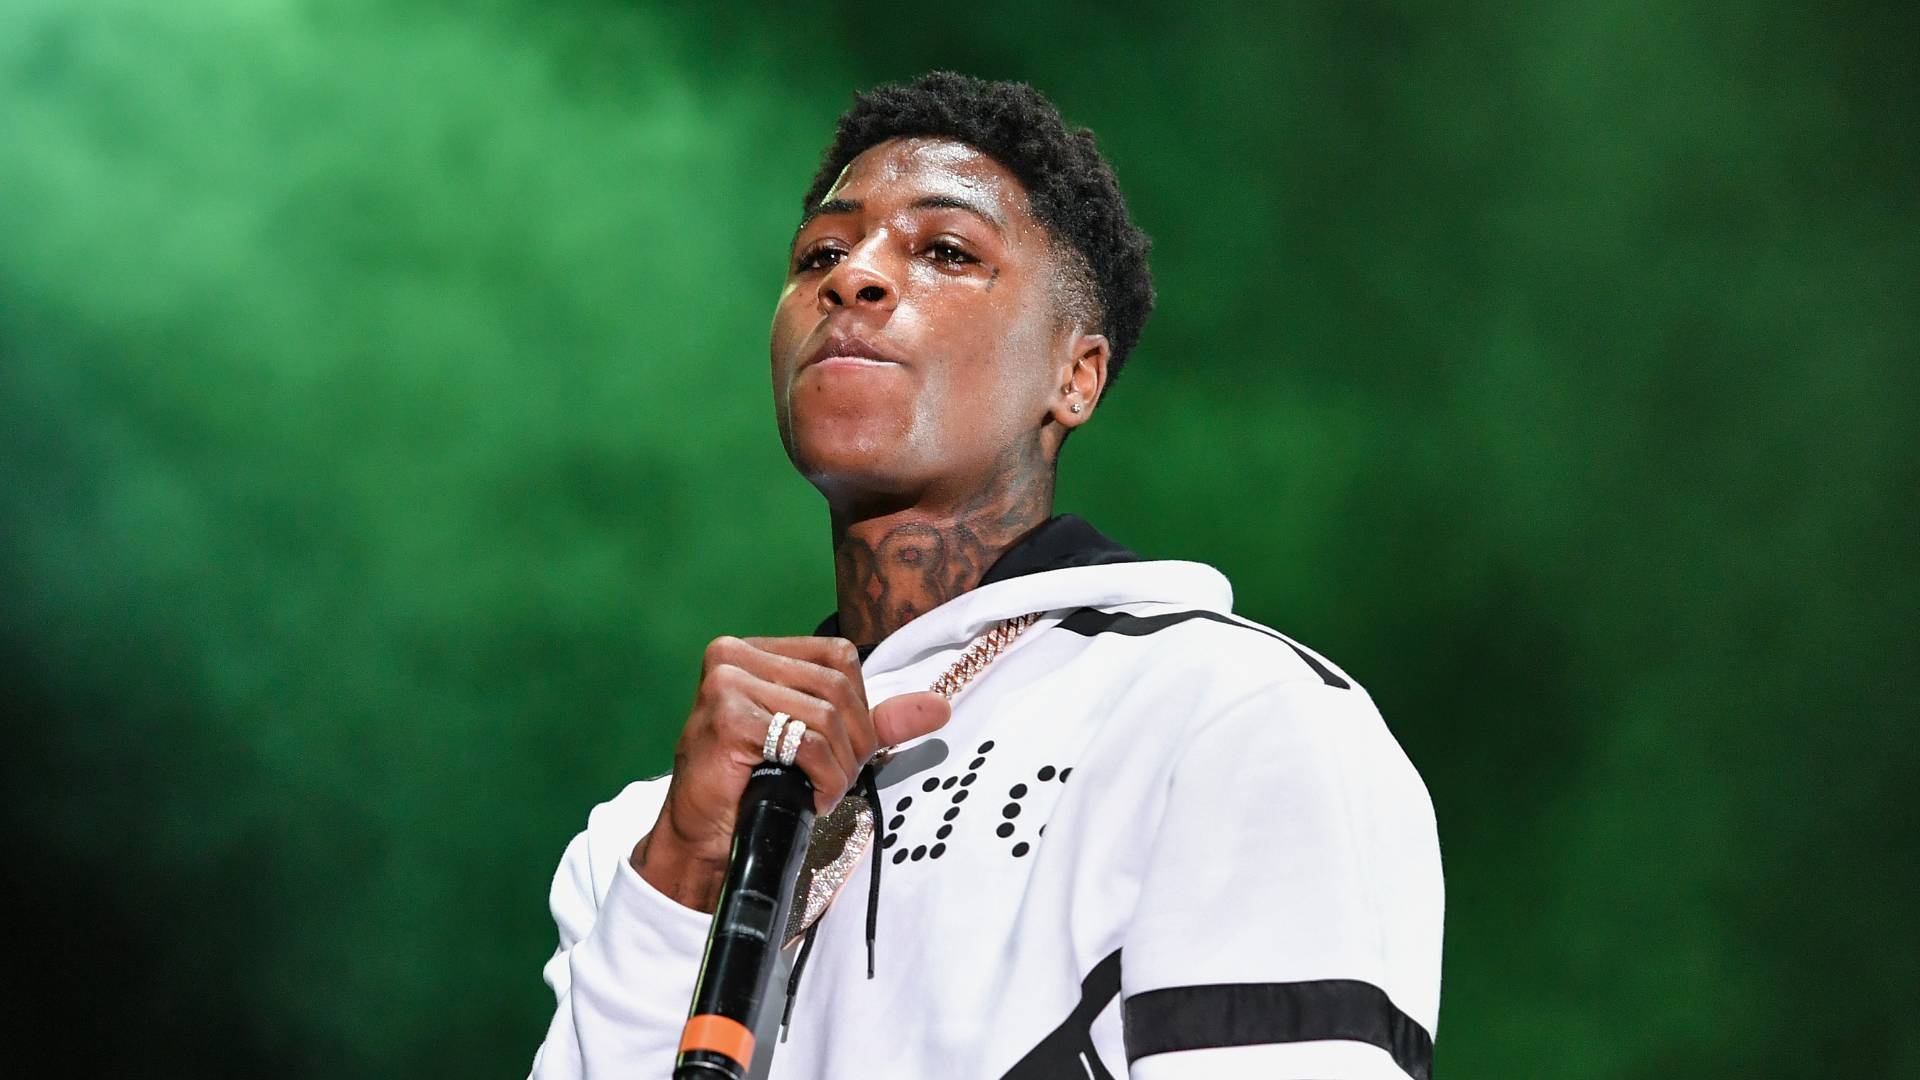 NBA YoungBoy performs during Lil WeezyAna at Champions Square on August 25, 2018 in New Orleans, Louisiana. 